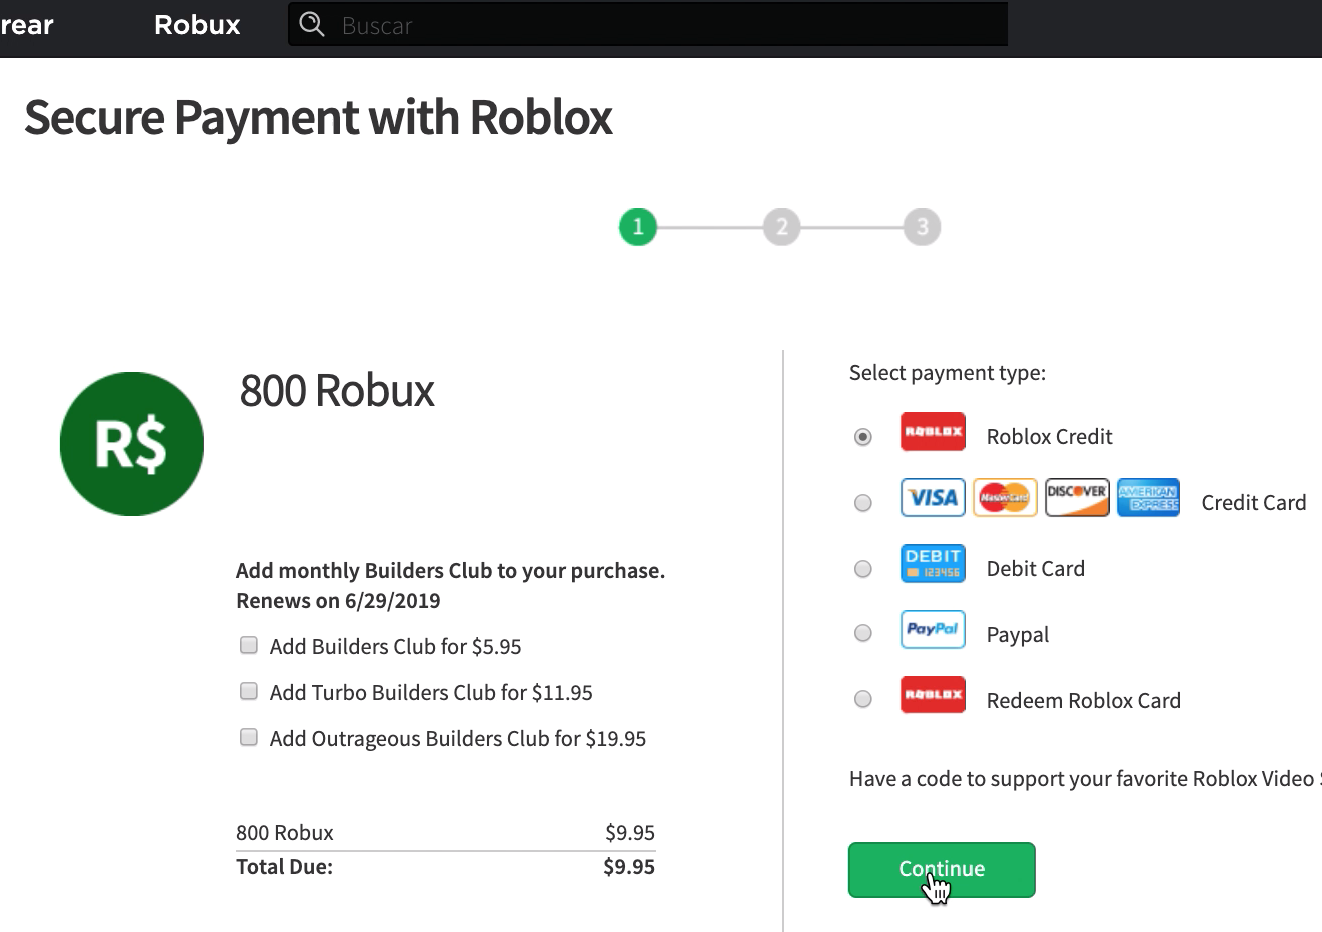 Pin Roblox Card How To Get Free Robux Codes 2019 February - how to hack roblox account 2019 is buxgg legit roblox